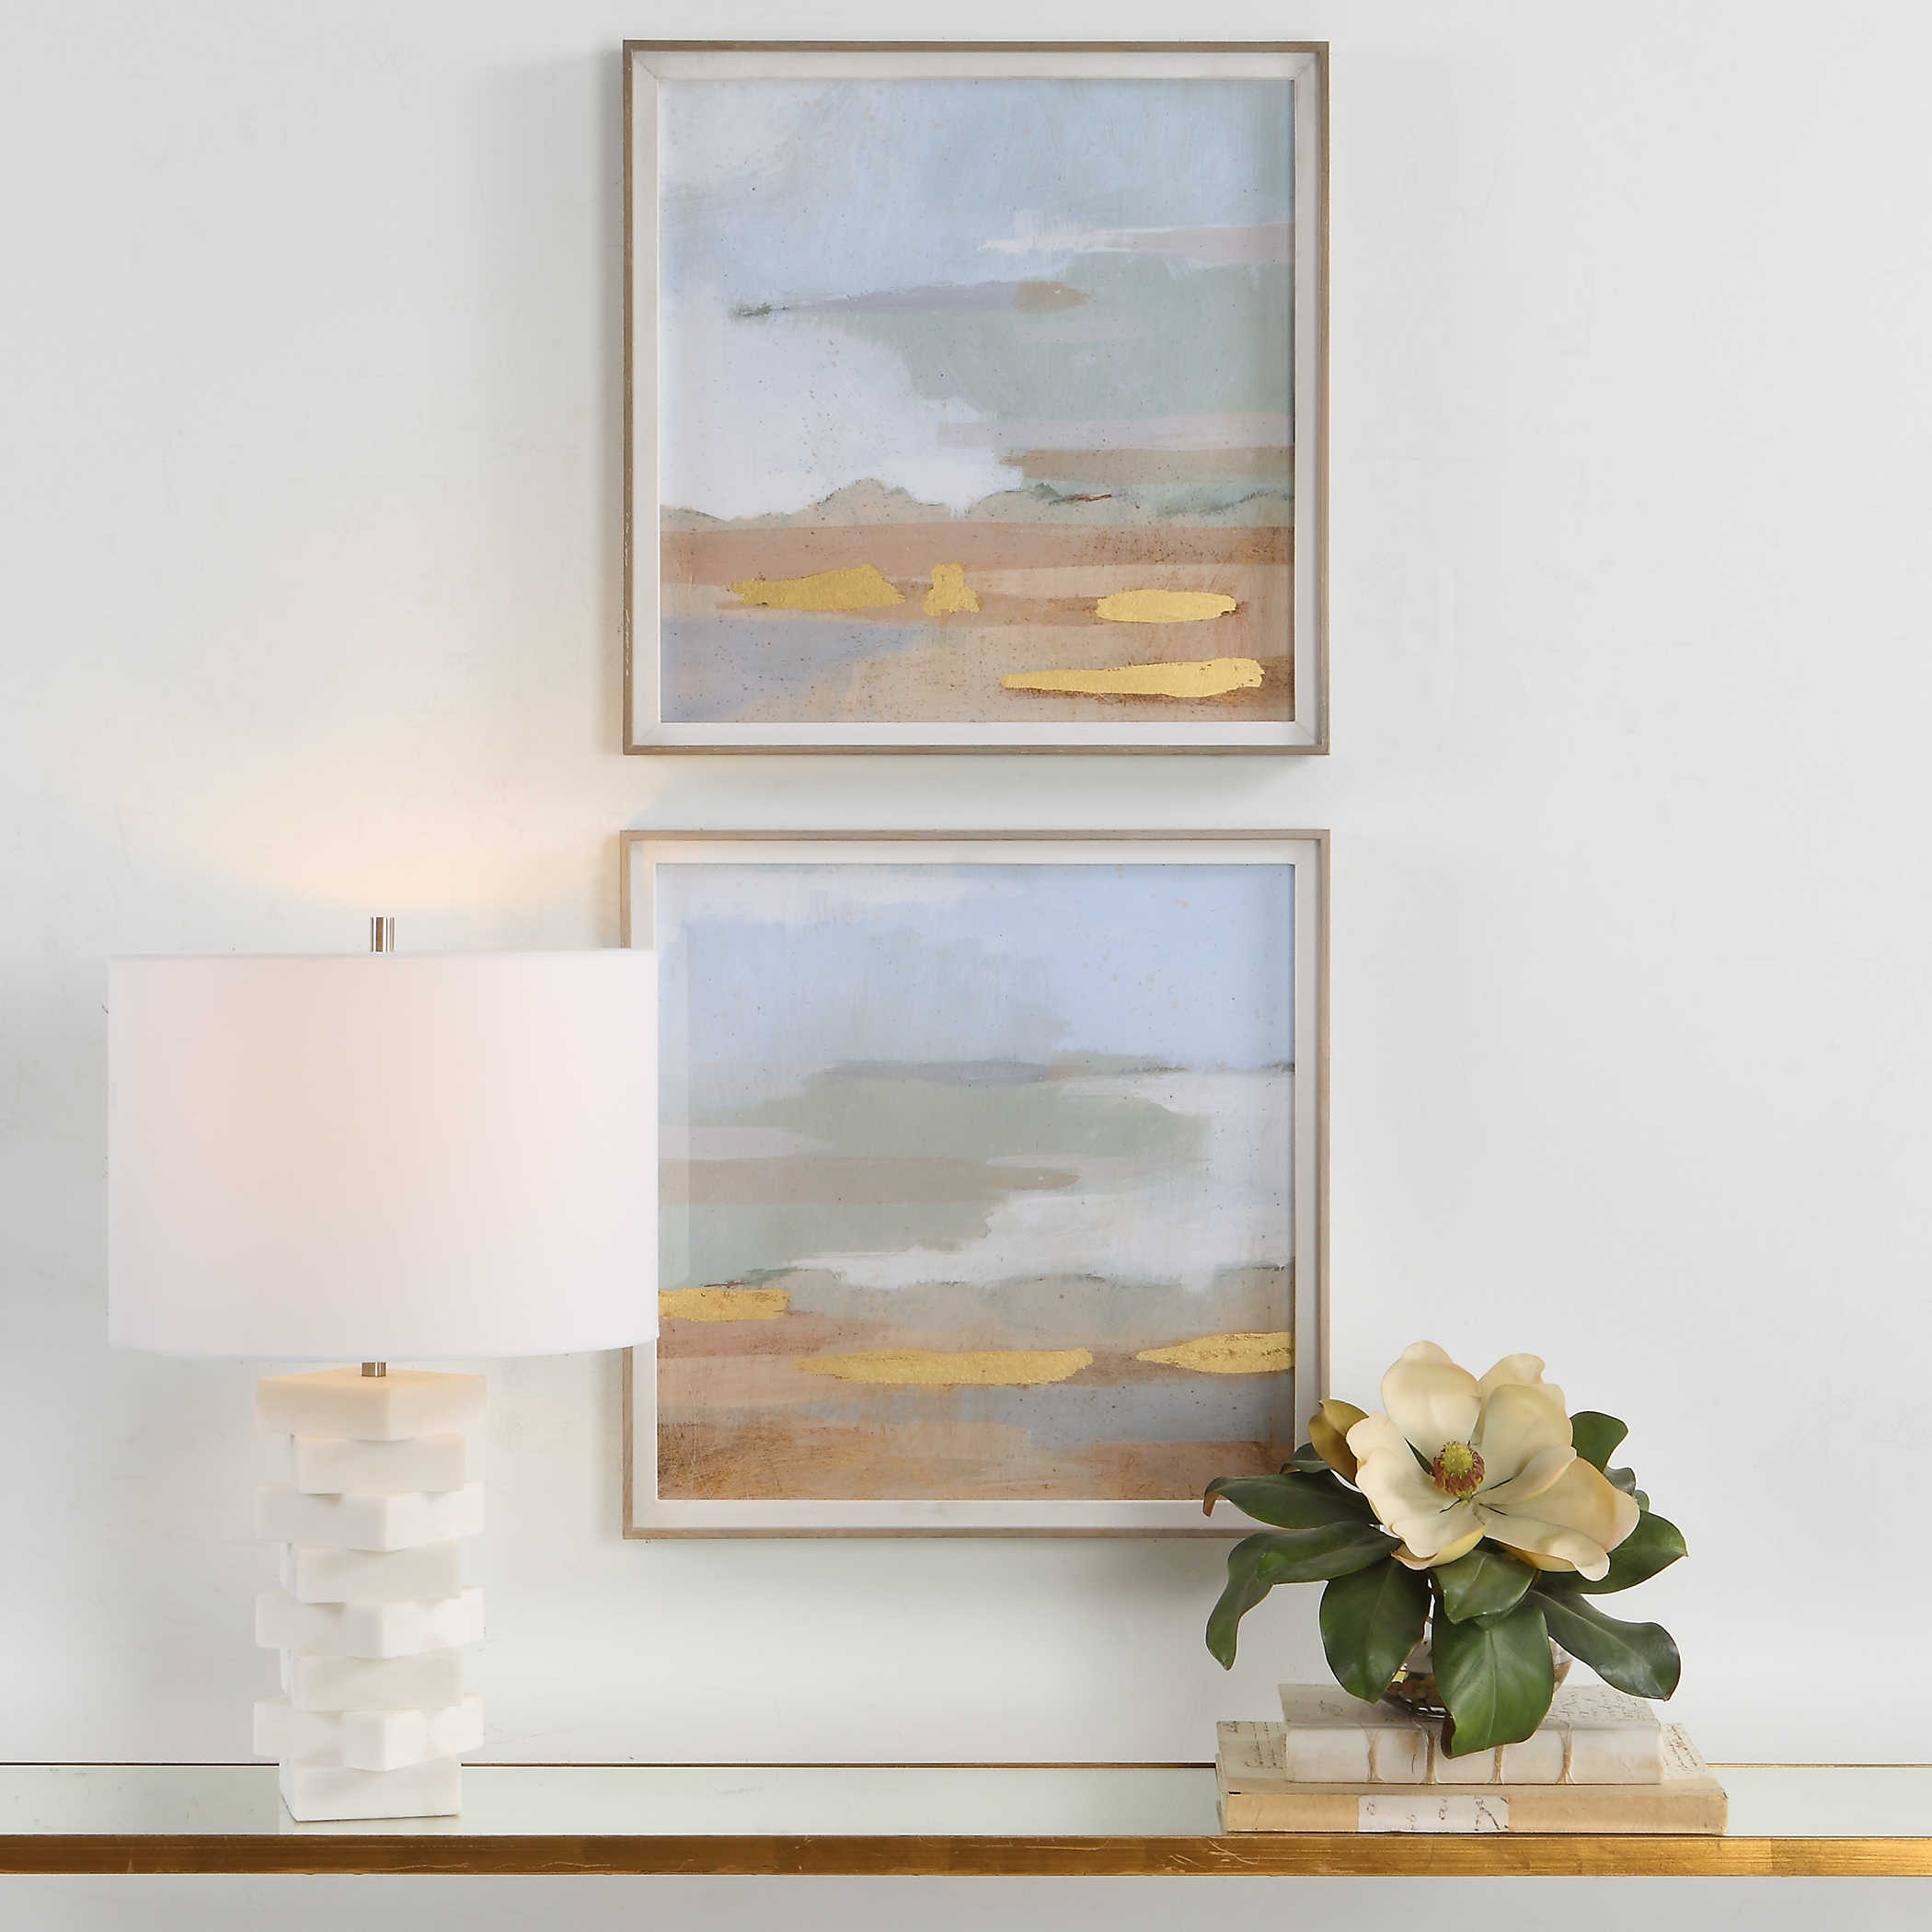 Uttermost Abstract Coastline Framed Prints, S/2 Décor/Home Accent Uttermost   